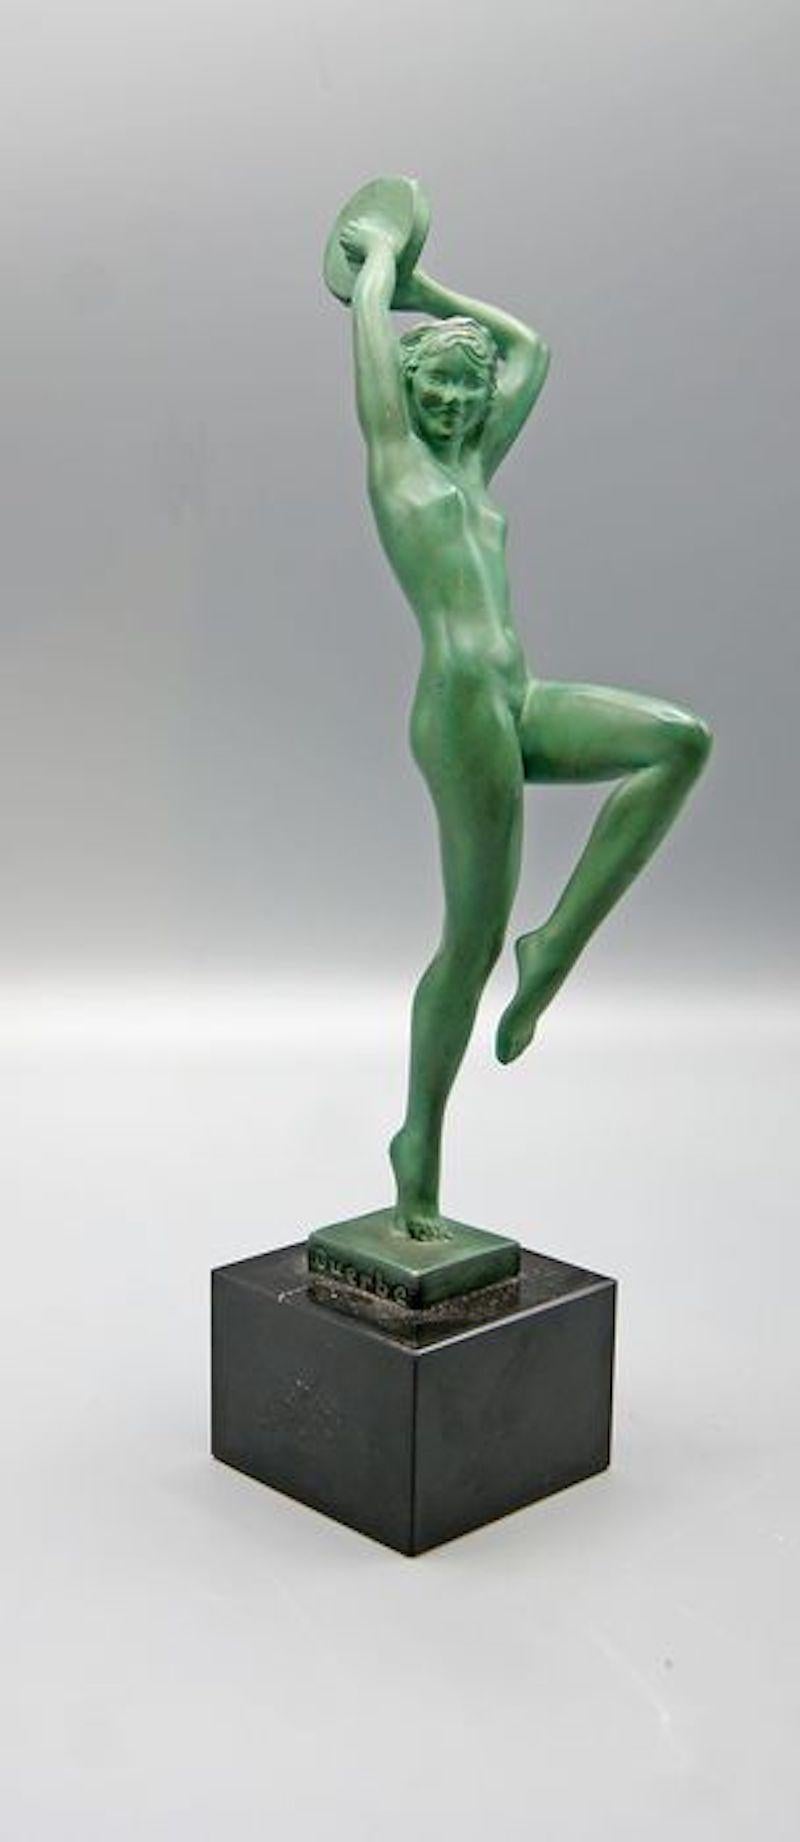 French Art Deco Patinated Metal Dancer Sculpture Black Marble Base by Raymonde Guerbe